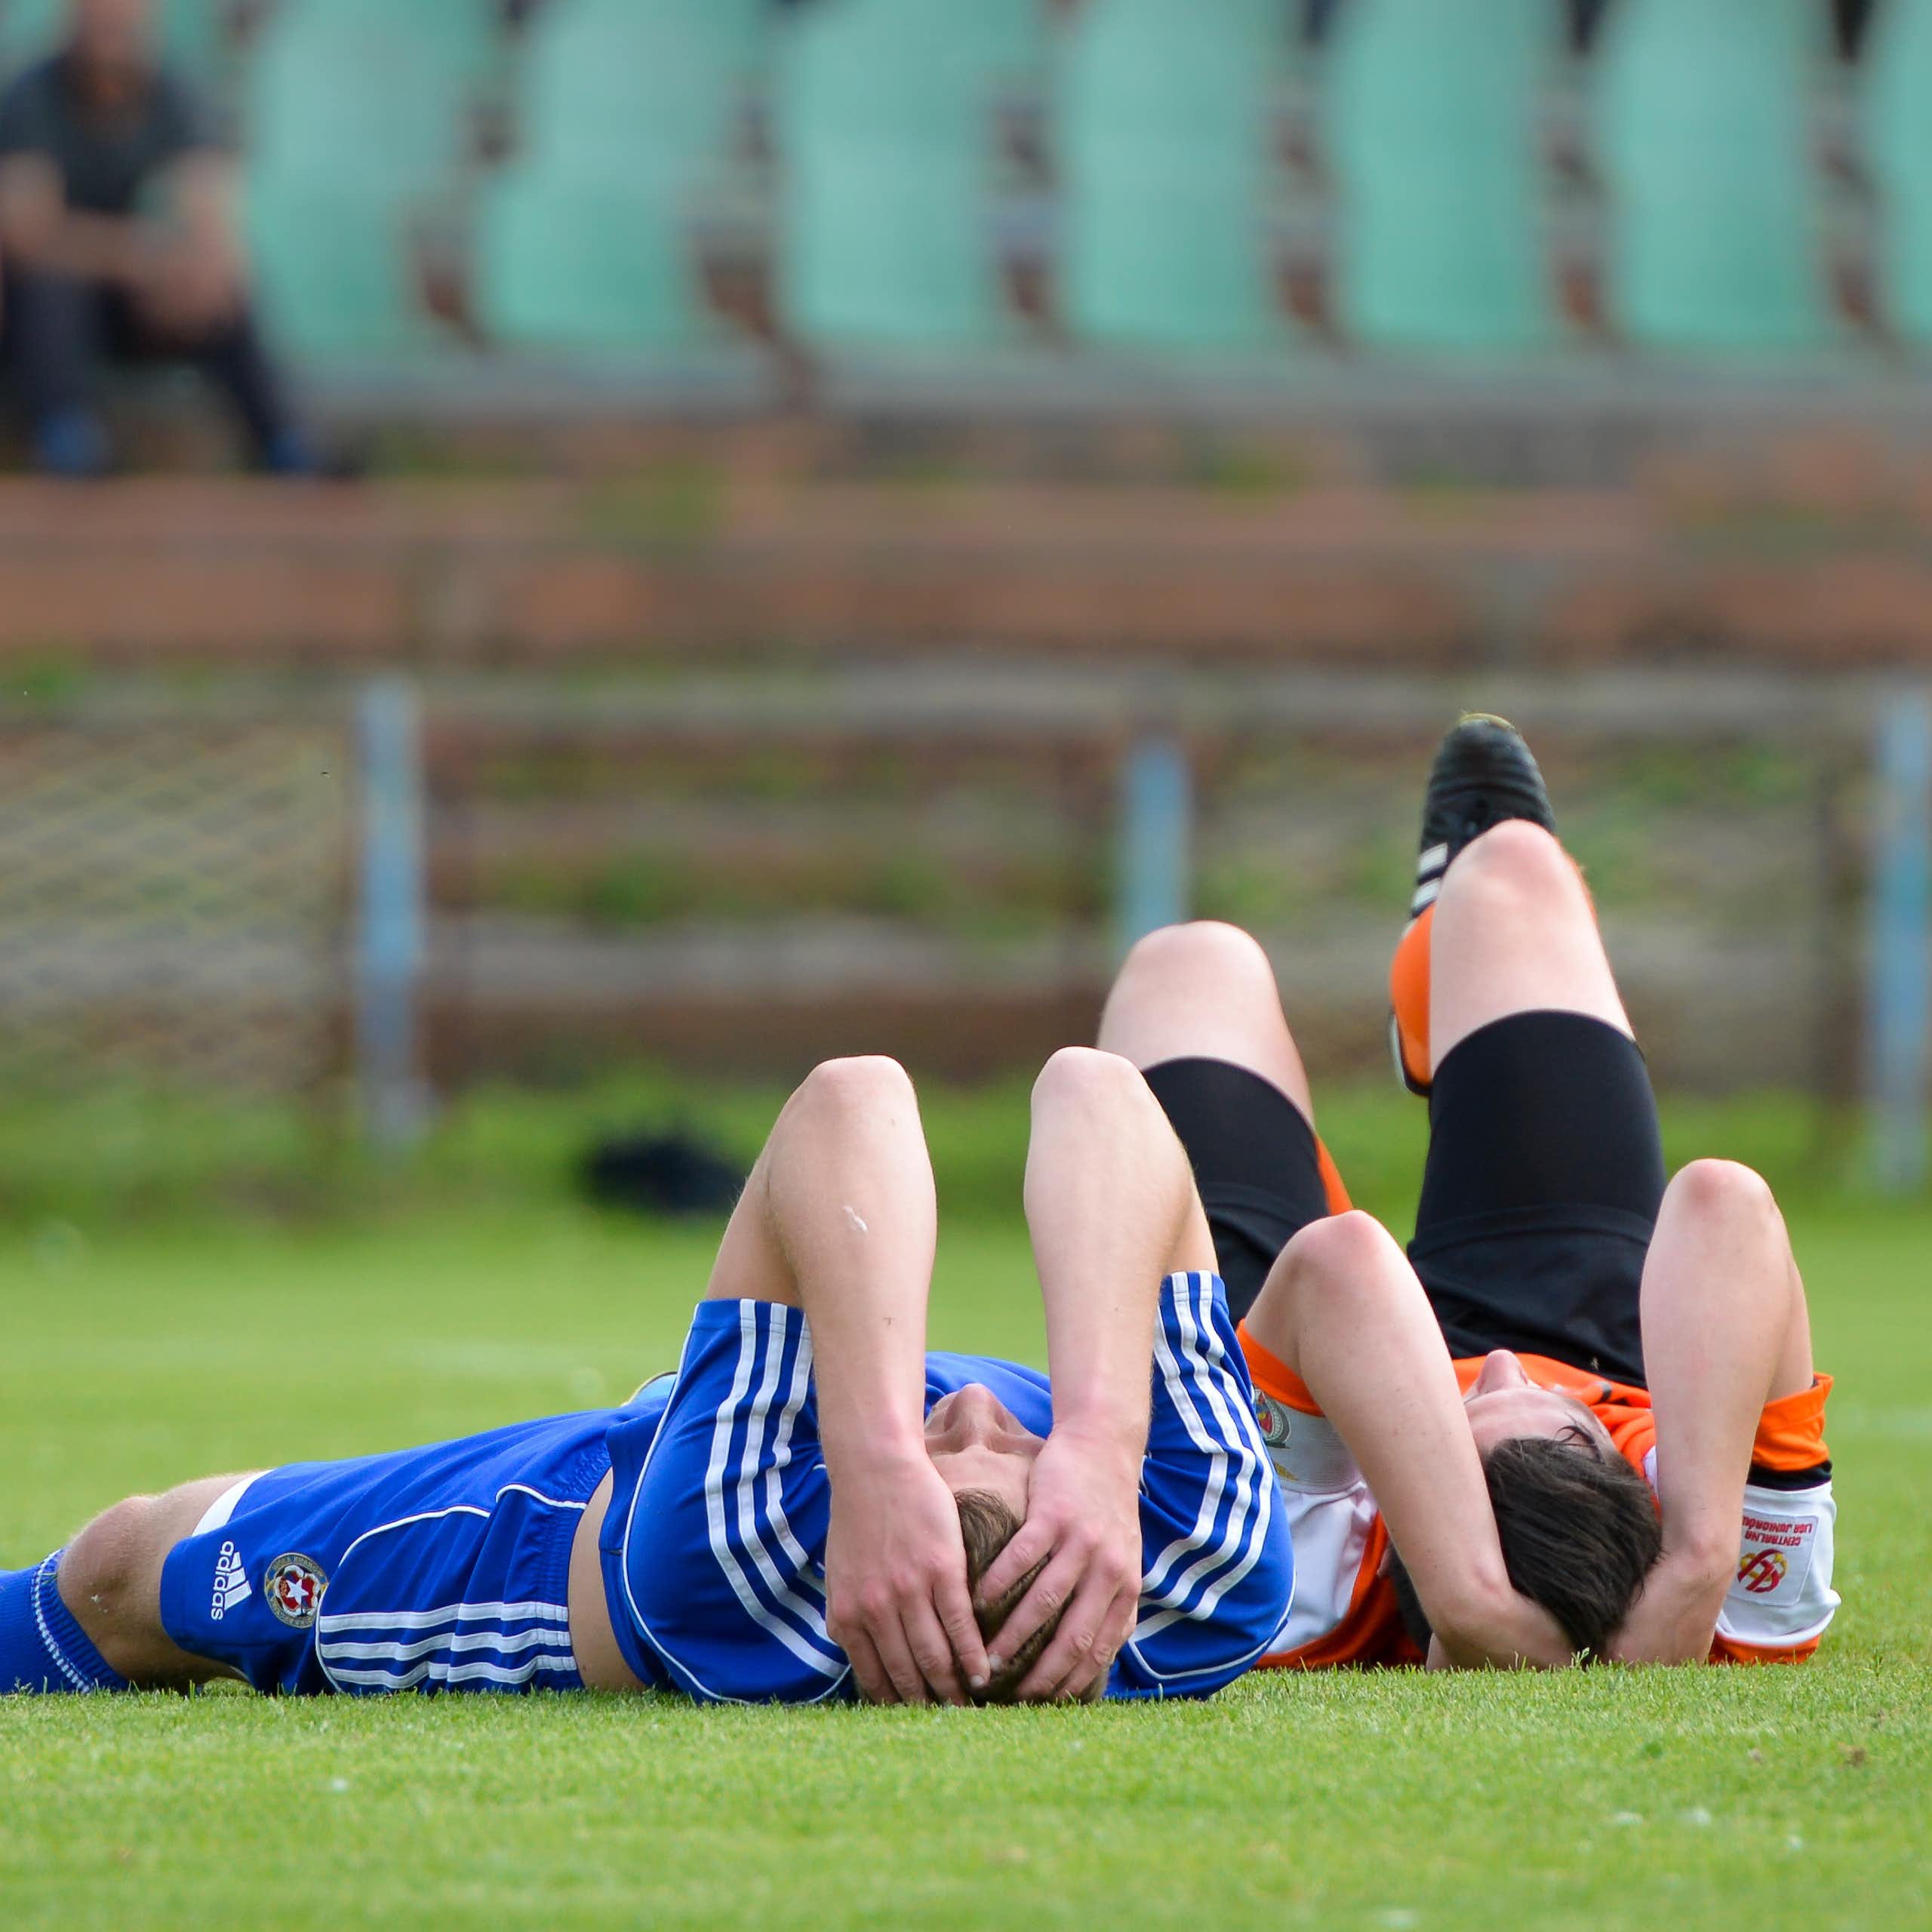 Two junior female soccer players lay injured, holding their heads